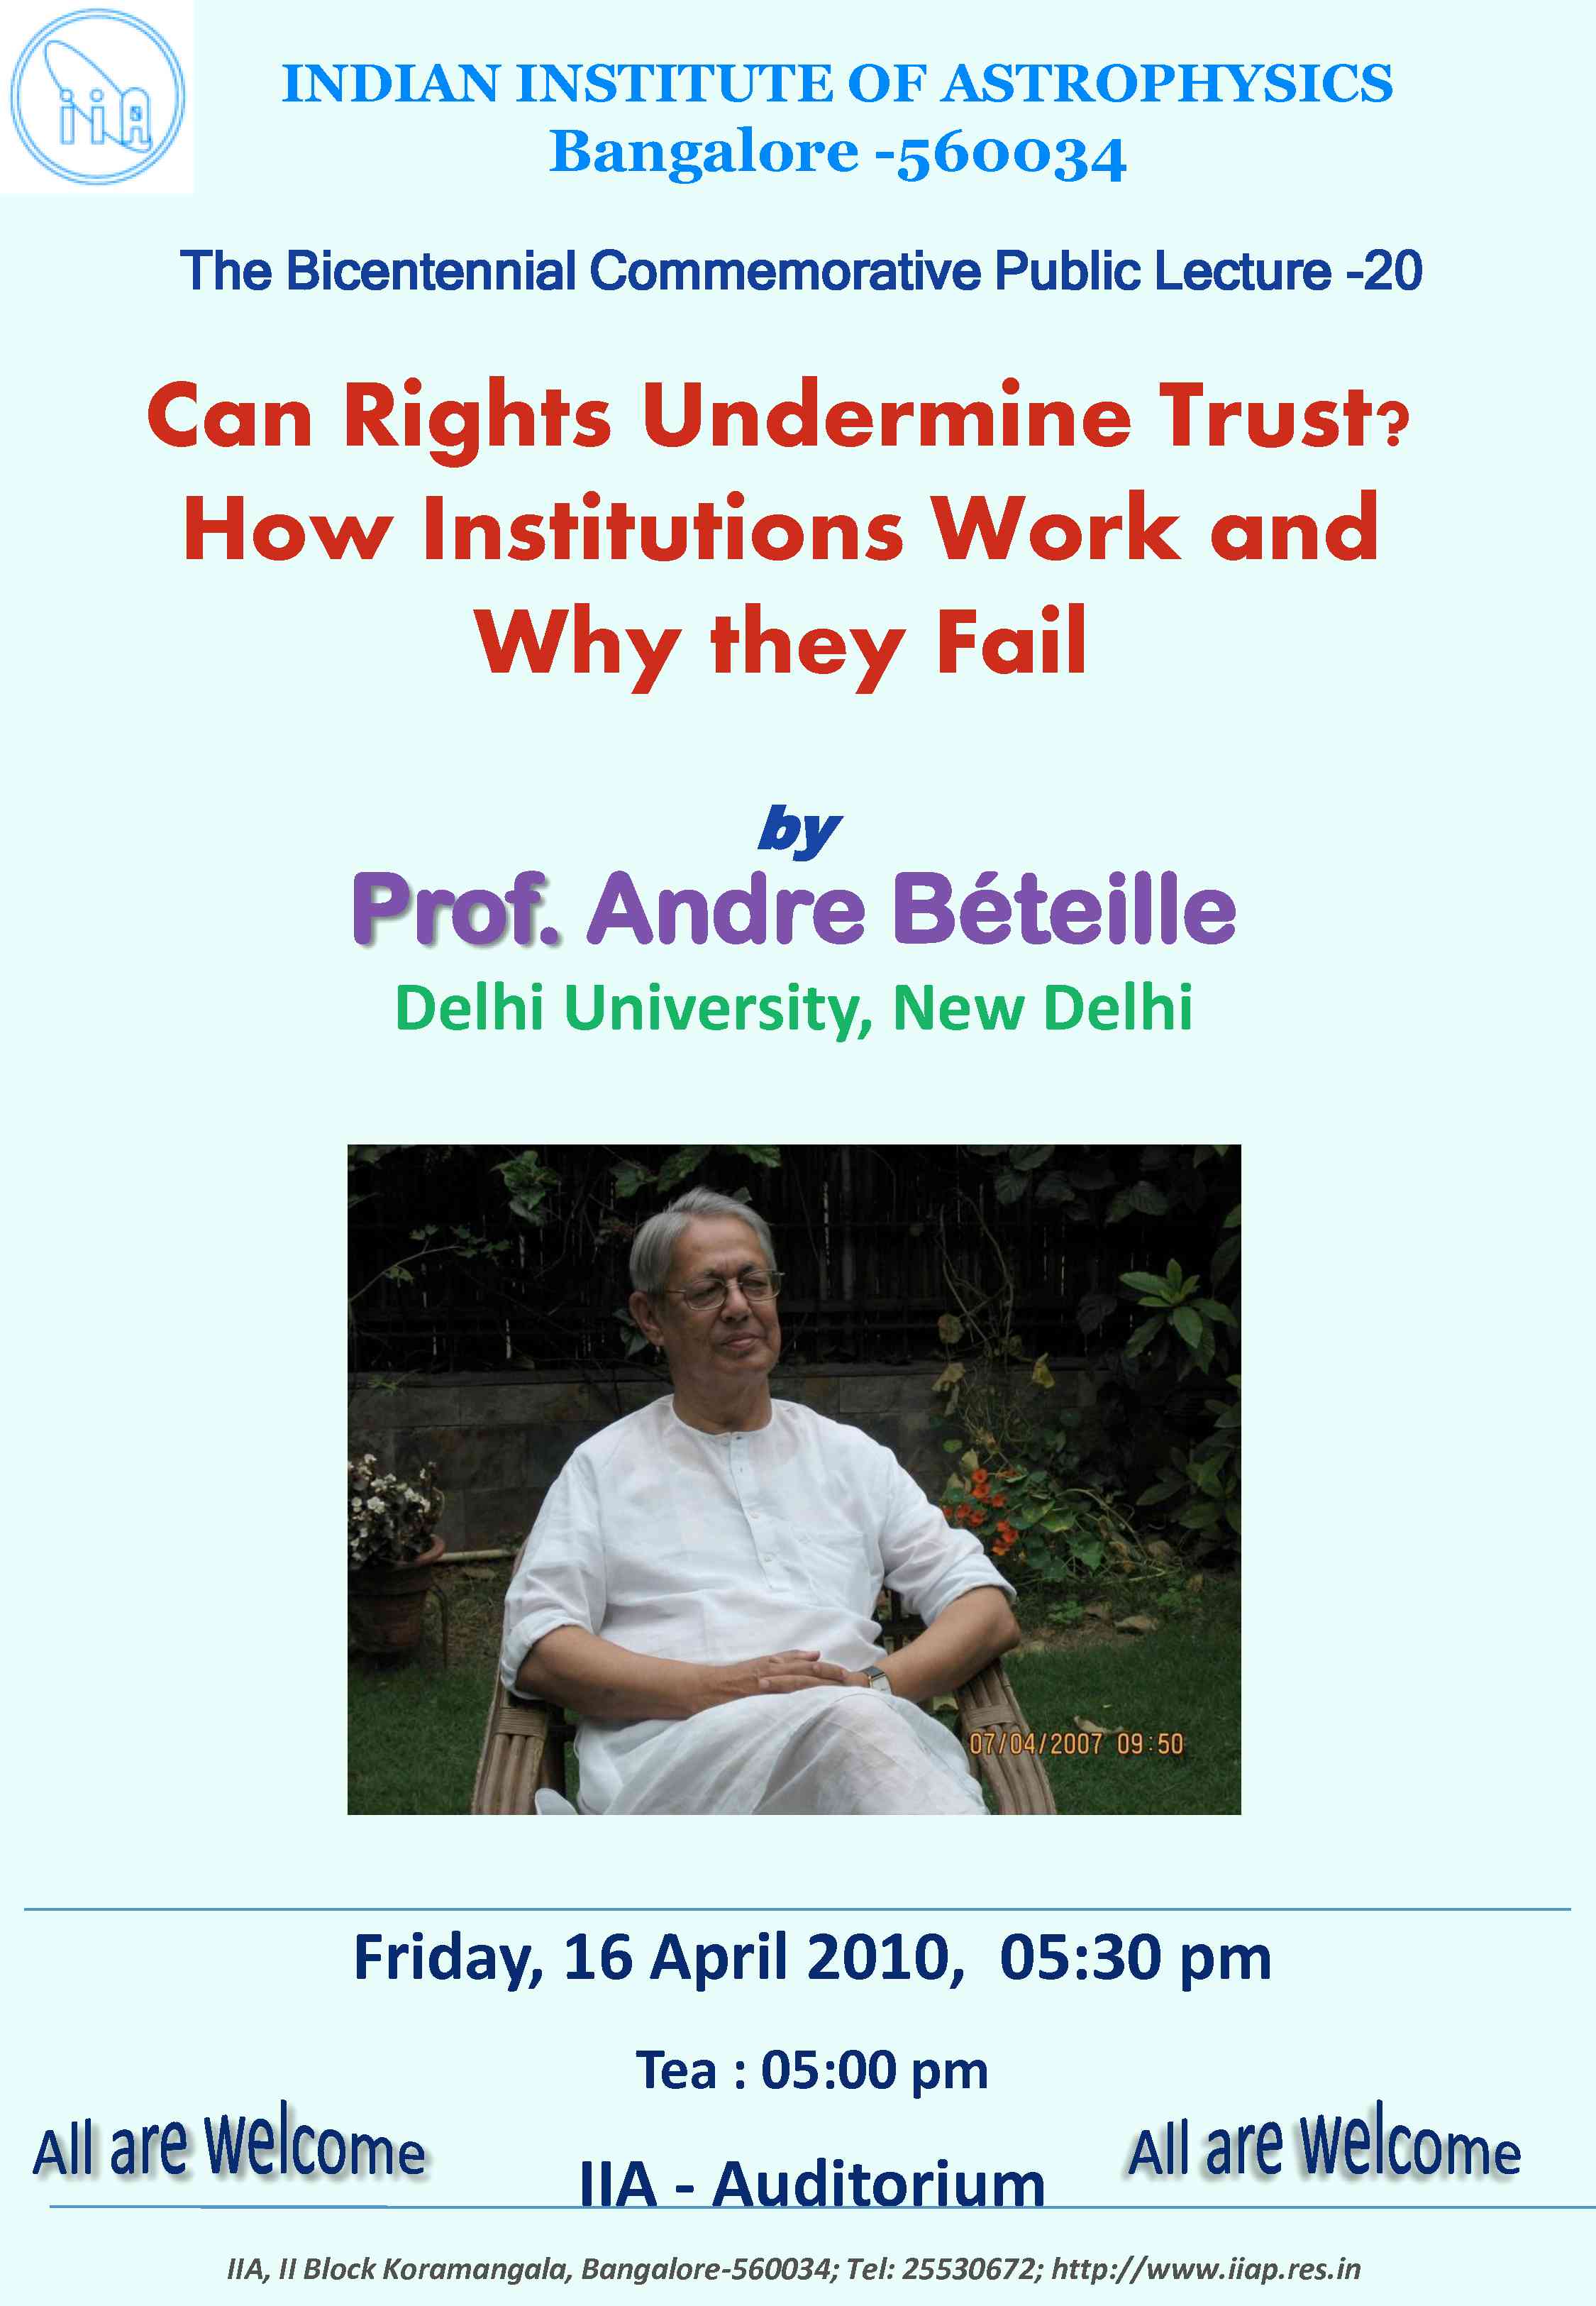 Bicentenary lecture - Andre Beteille